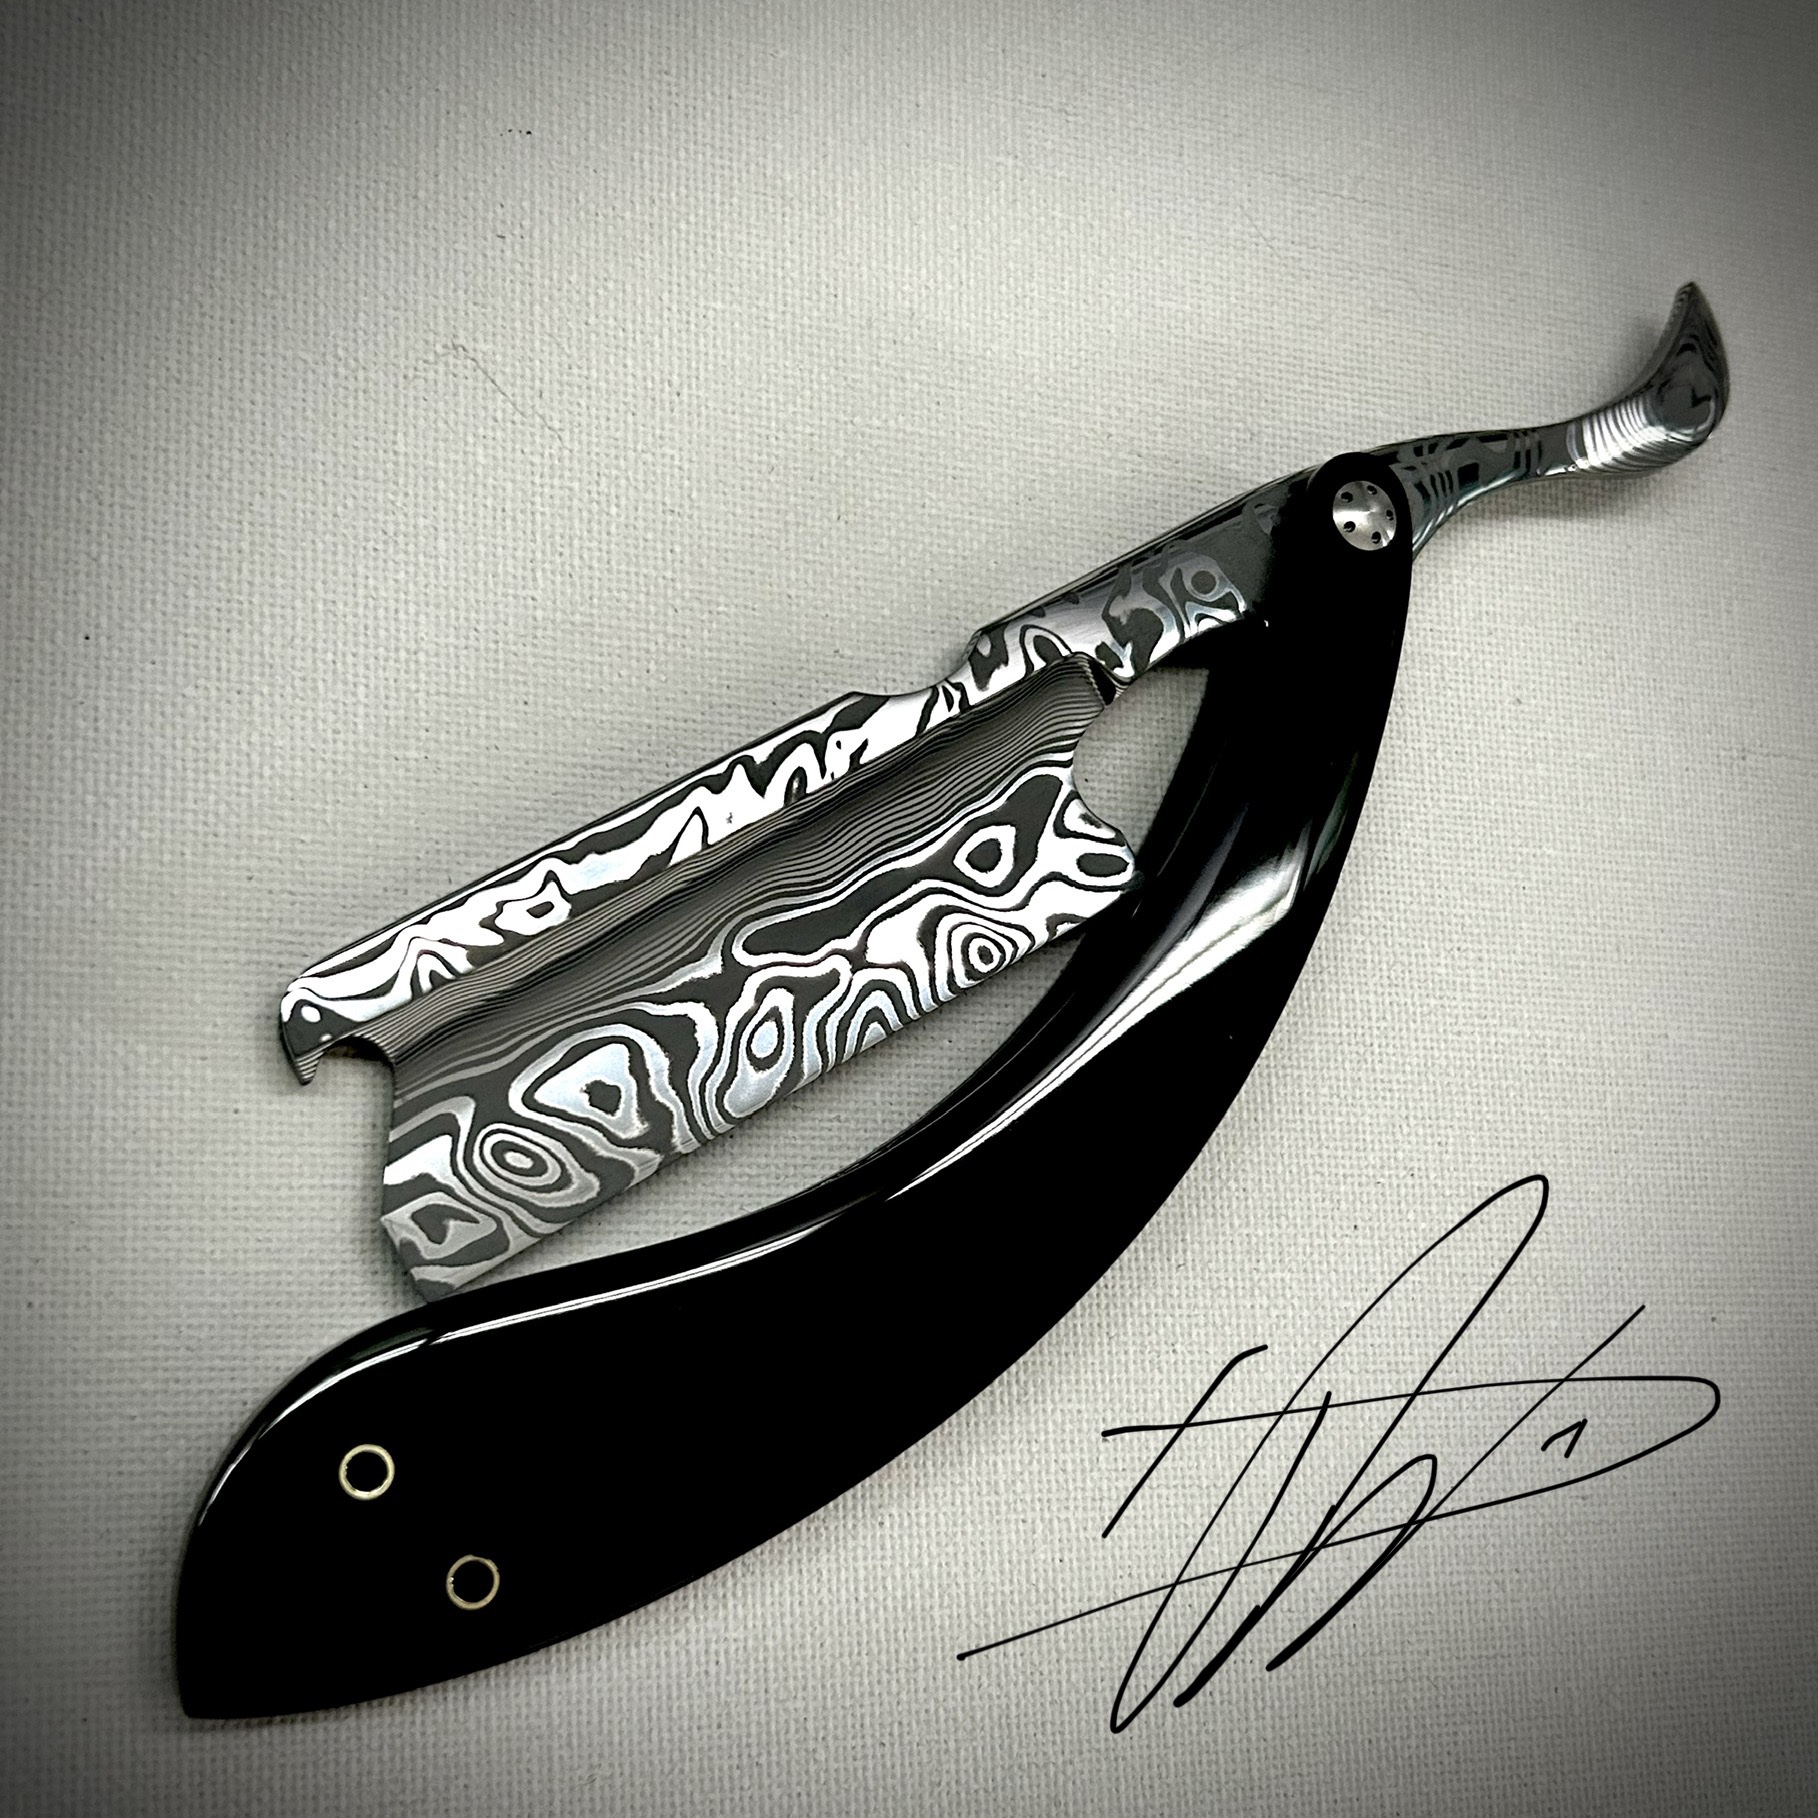 Woolfblades 356 Custom Made in a Vinland Damasteel razor ,And the scales are made in a tortious shell kerinite resin with carbon fibre inlays